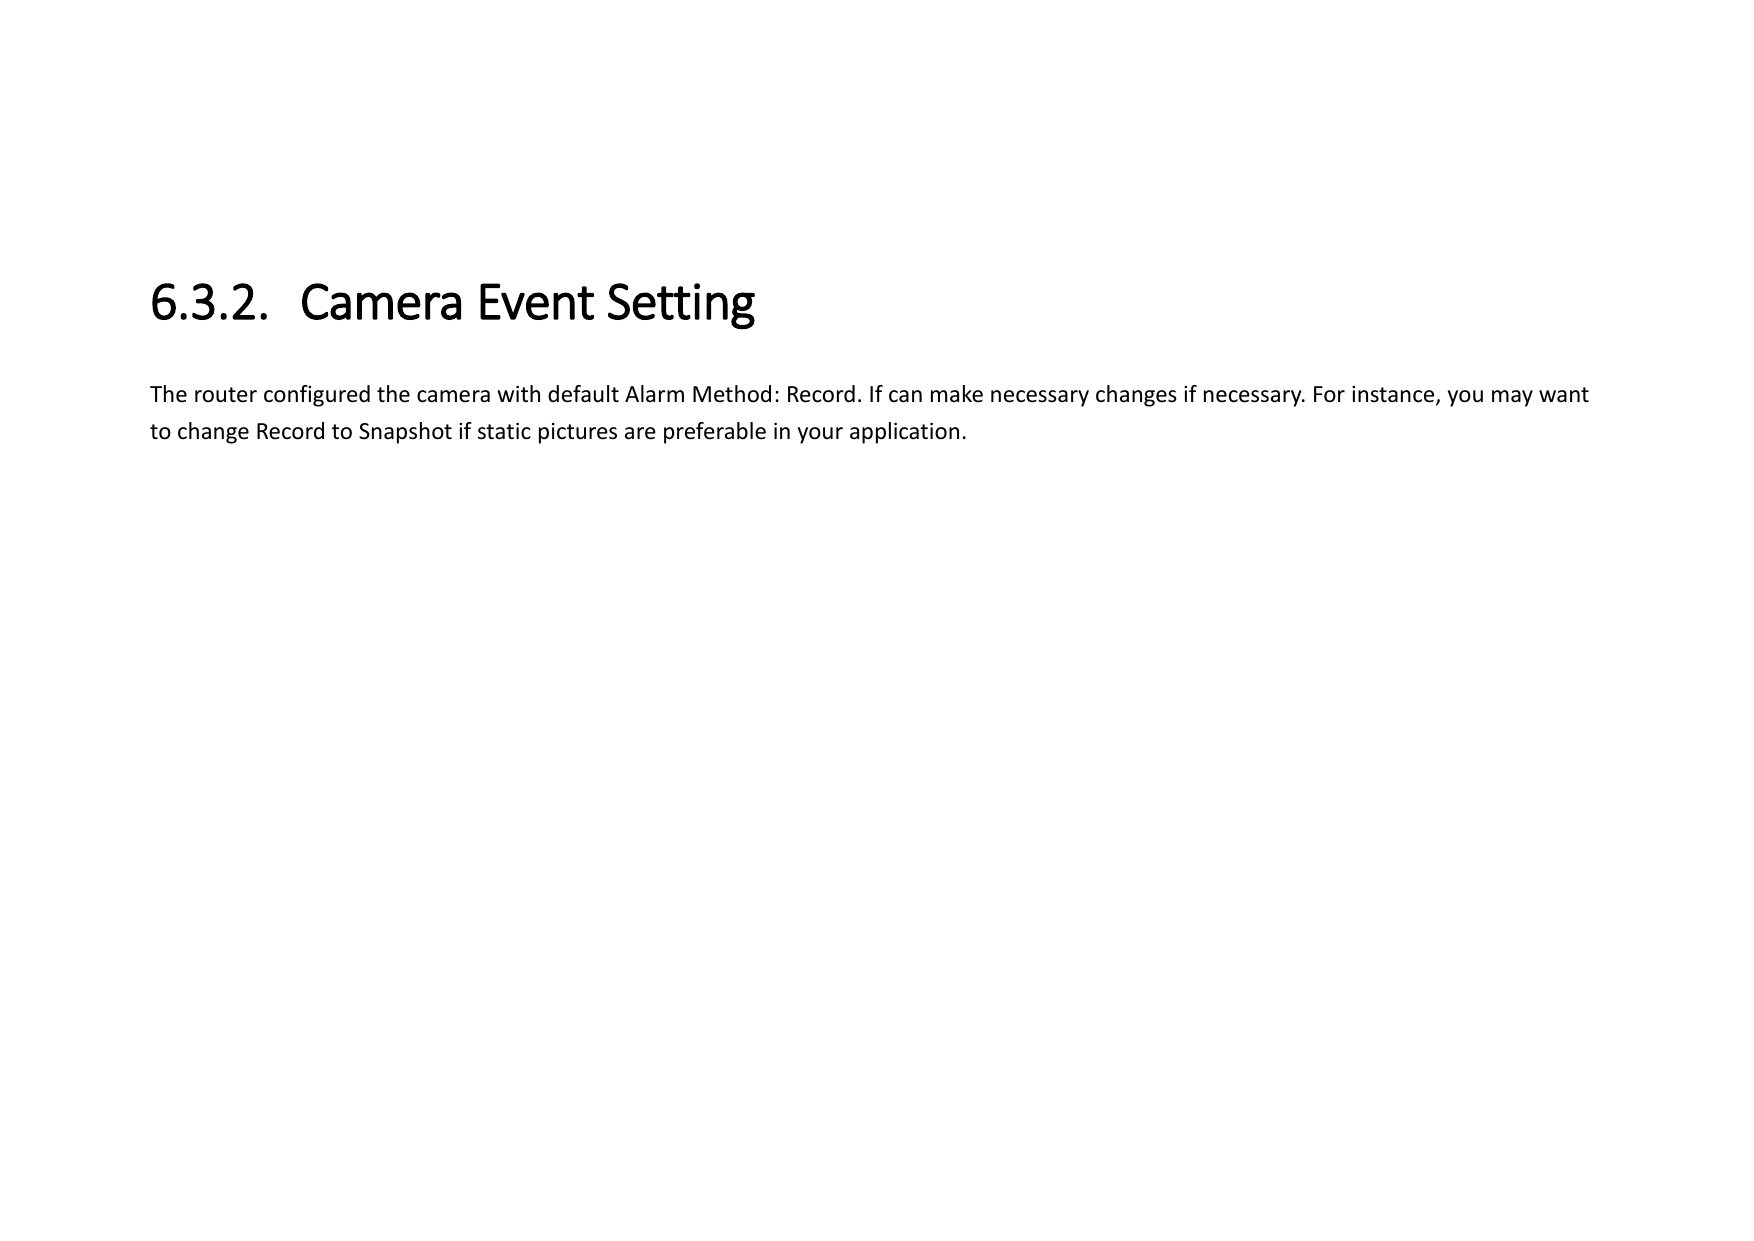  6.3.2. Camera Event Setting The router configured the camera with default Alarm Method: Record. If can make necessary changes if necessary. For instance, you may want to change Record to Snapshot if static pictures are preferable in your application. 